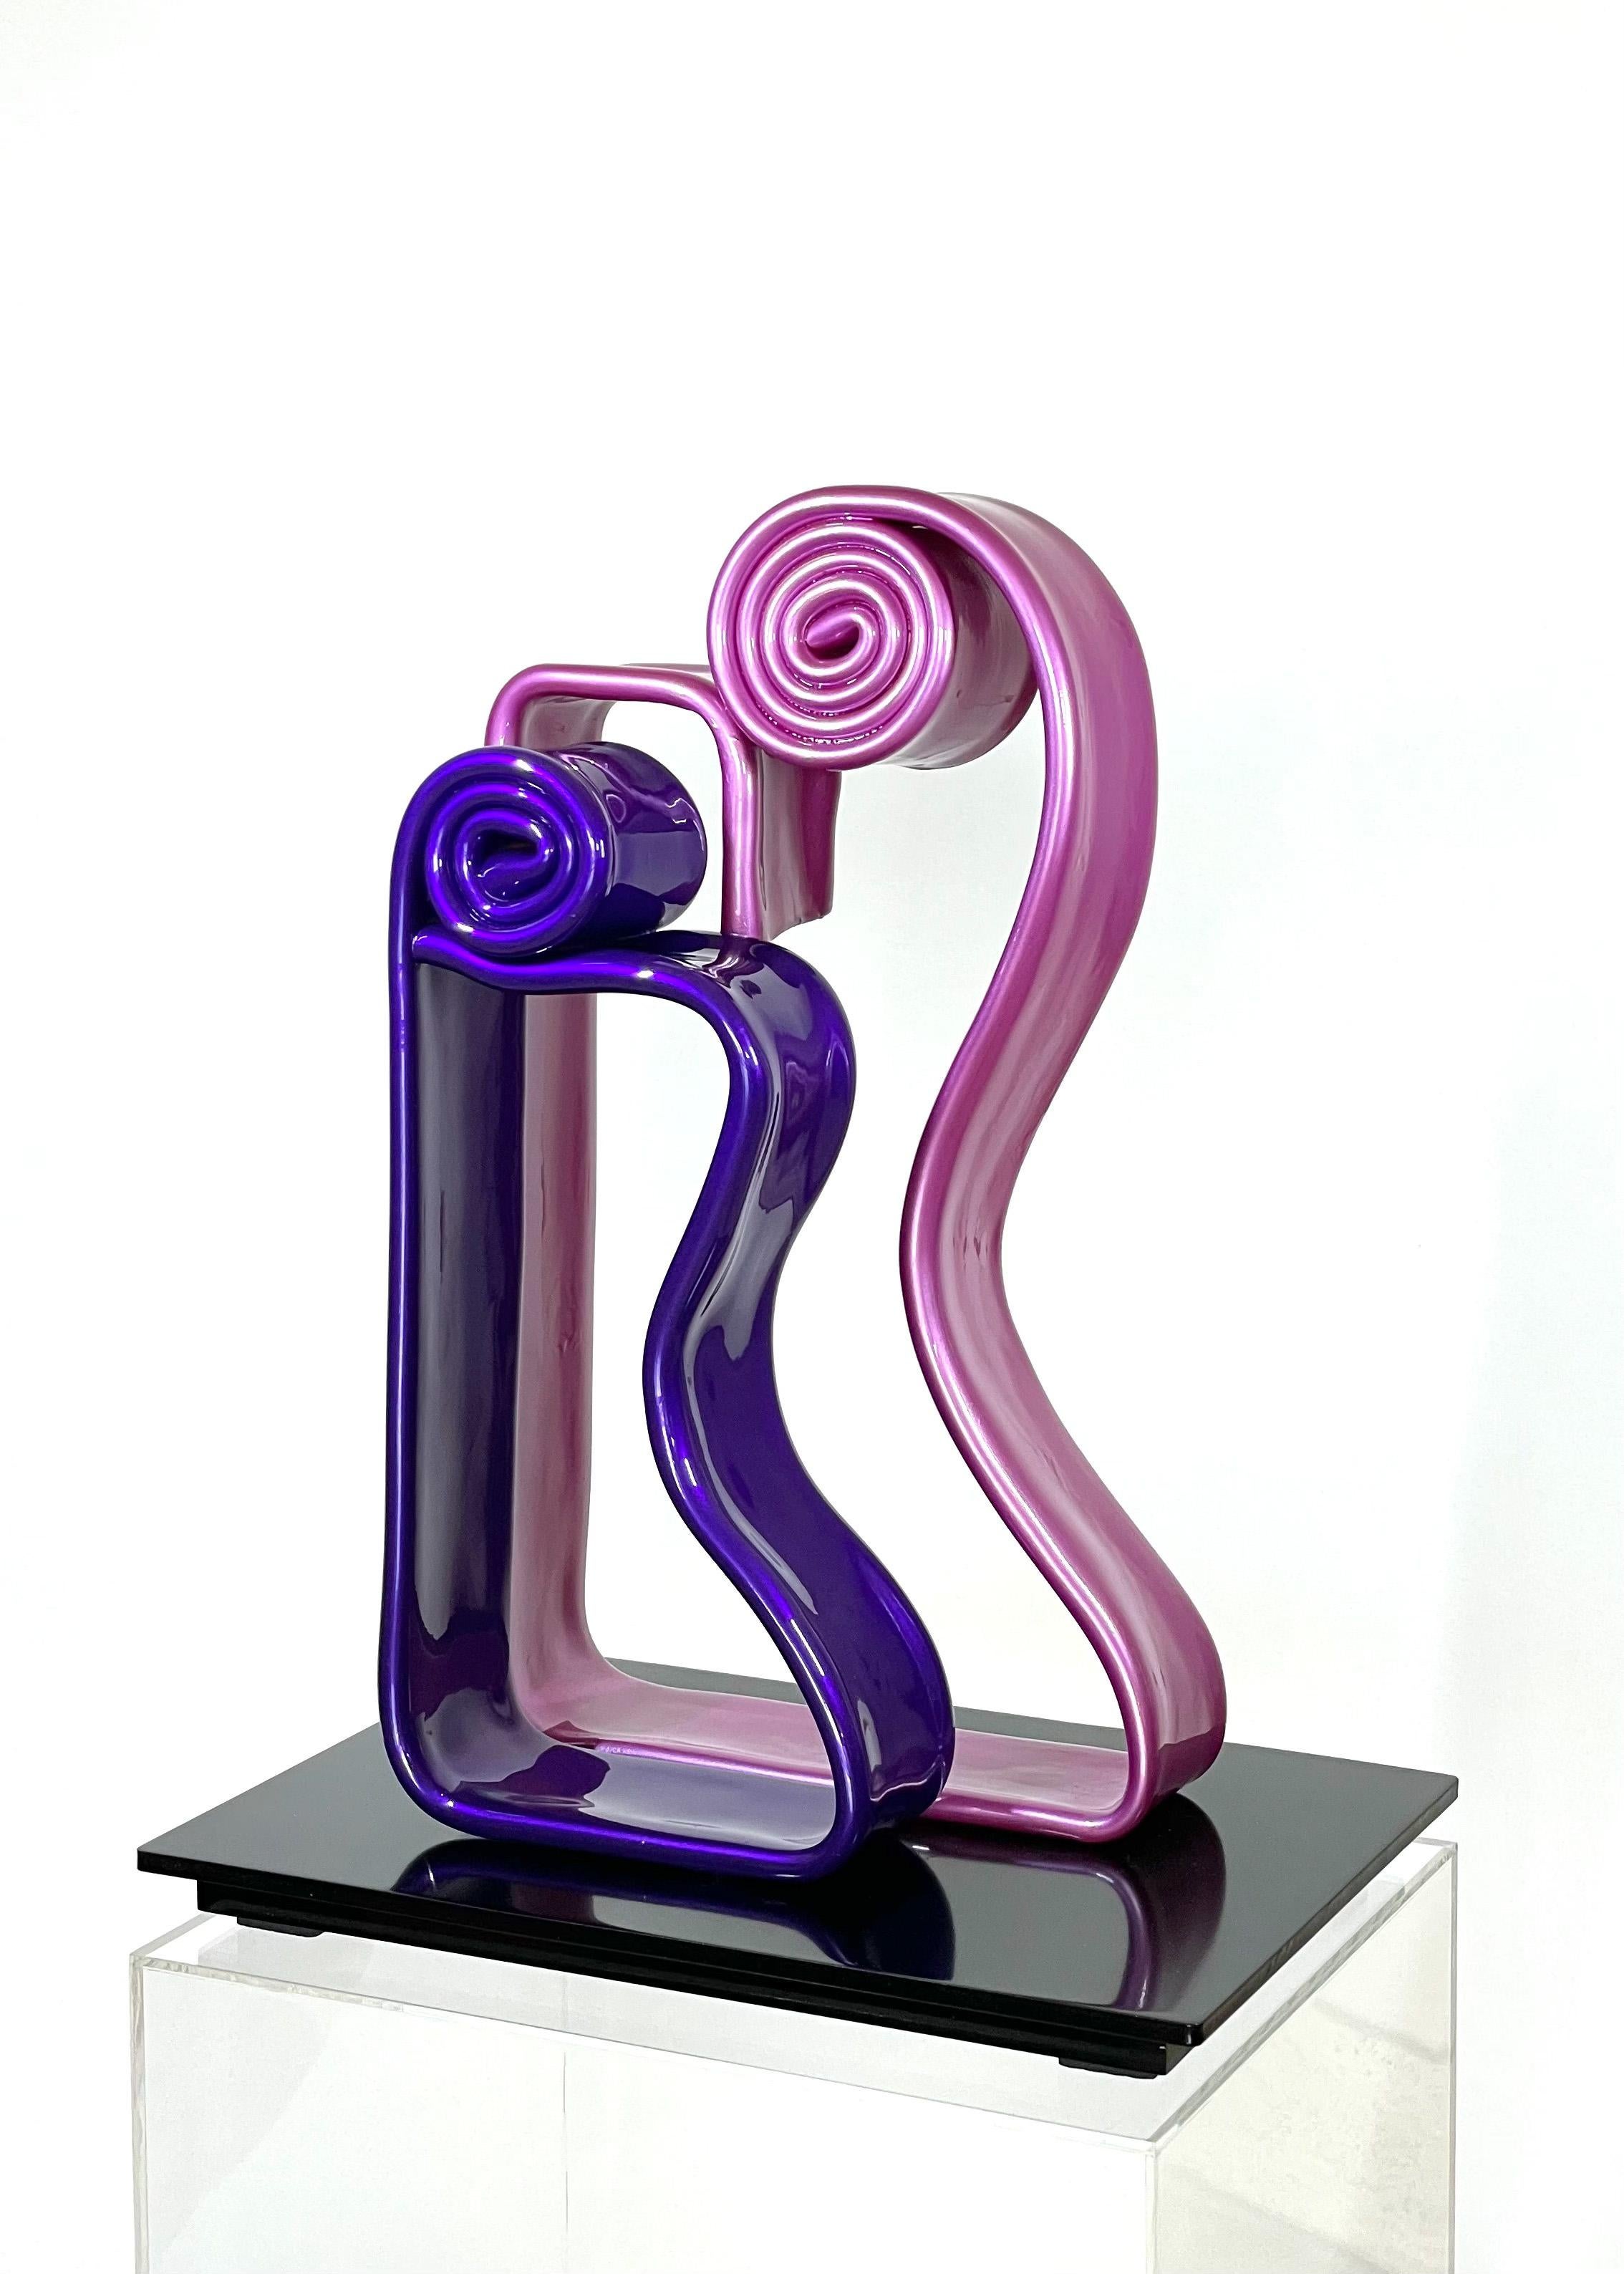 Lina Husseini Abstract Sculpture - Symbiosis